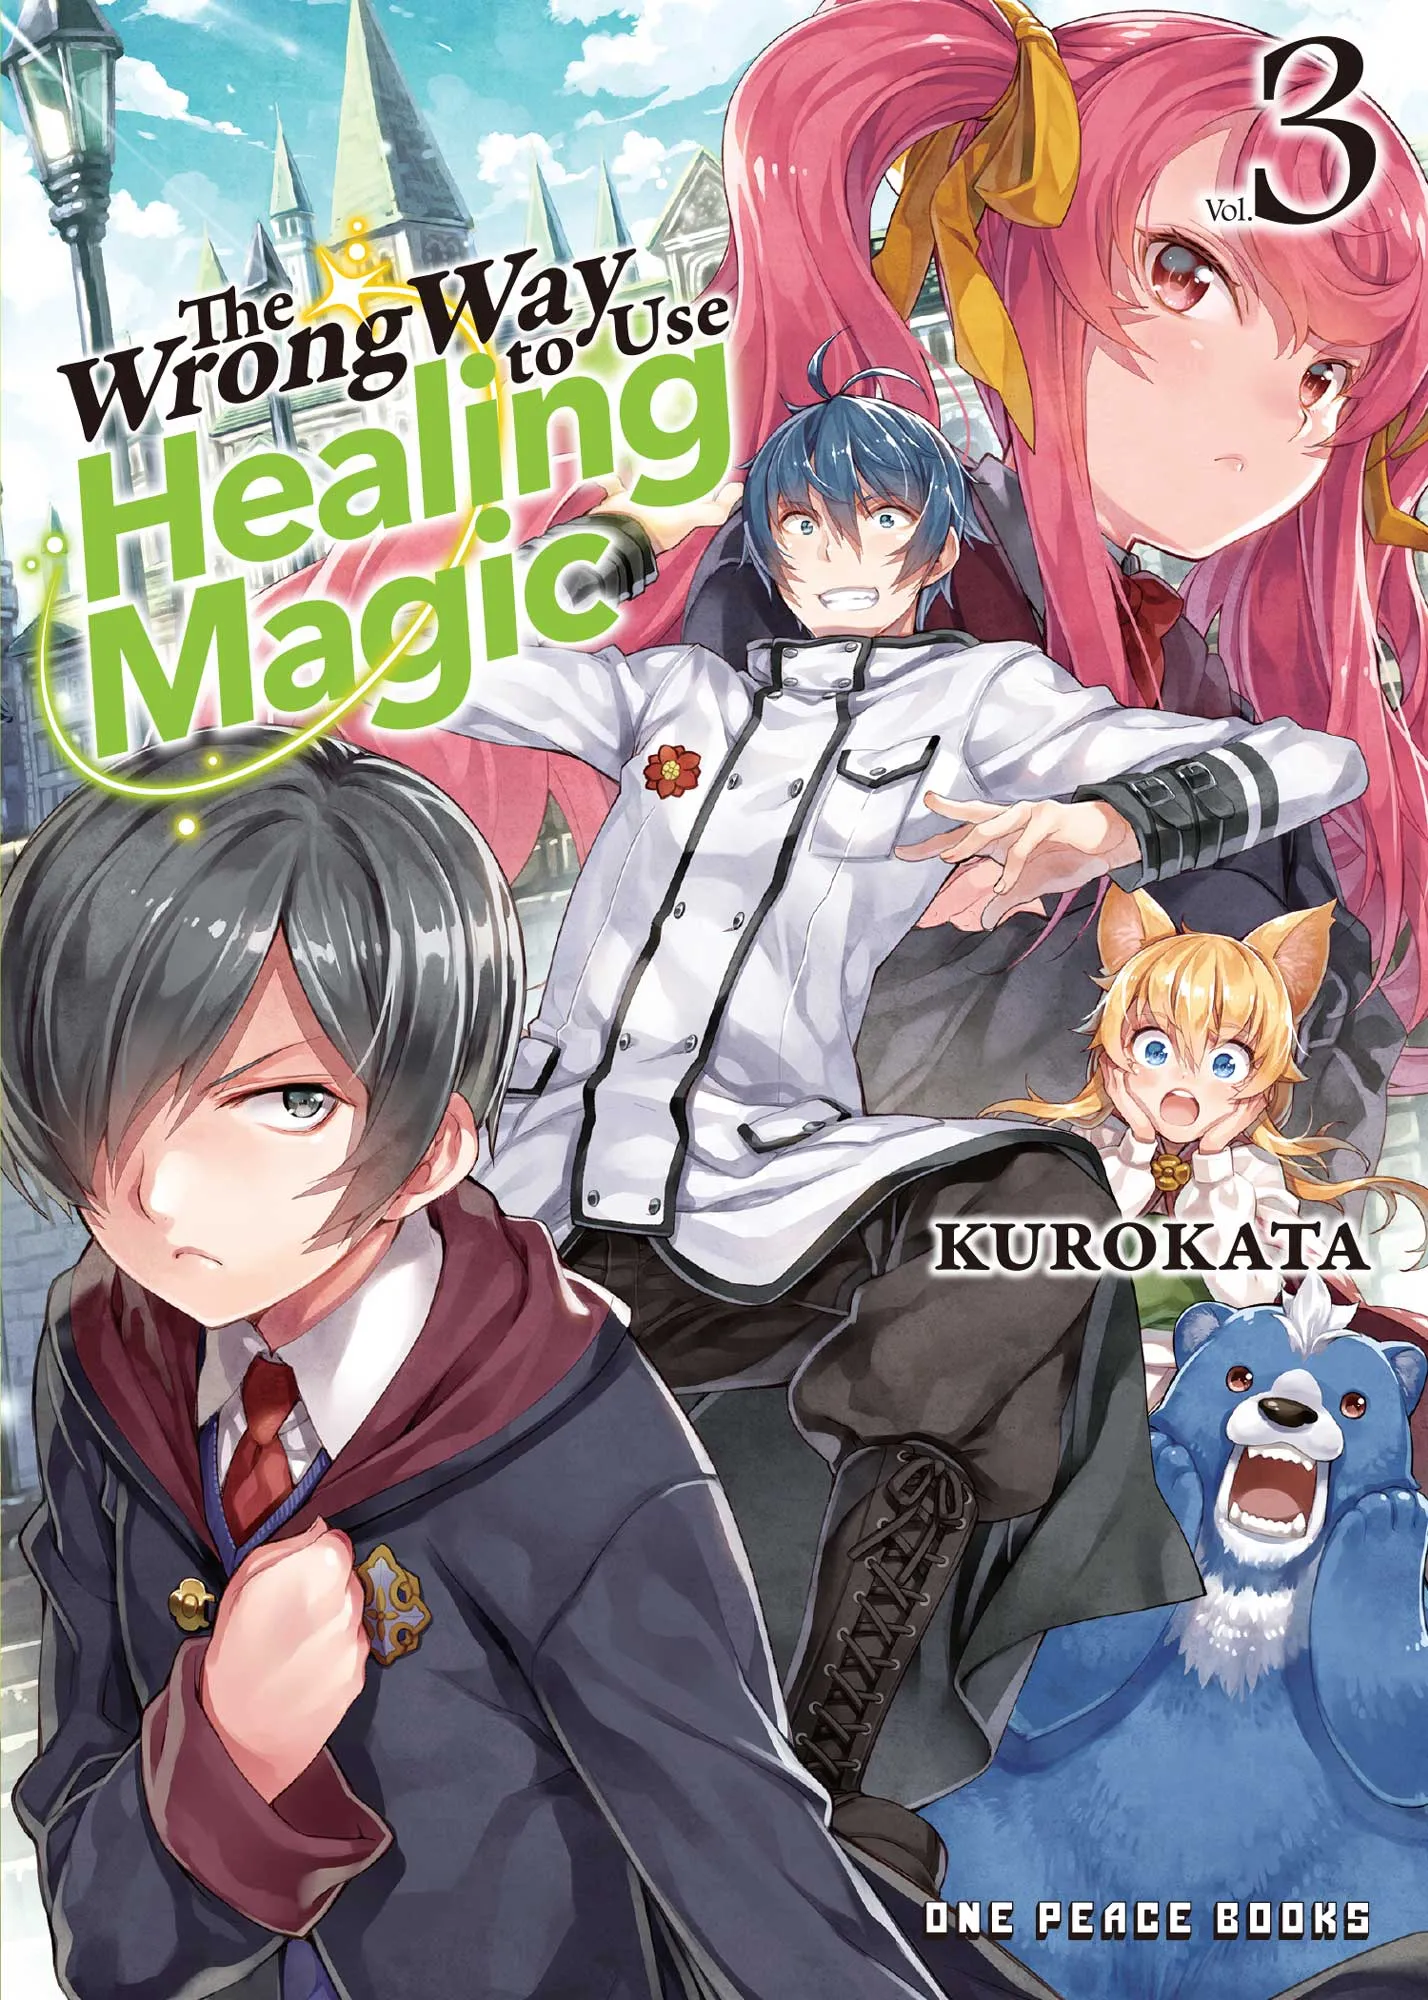 The Wrong Way to Use Healing Magic Volume 3 (The Wrong Way to Use Healing Magic #3)